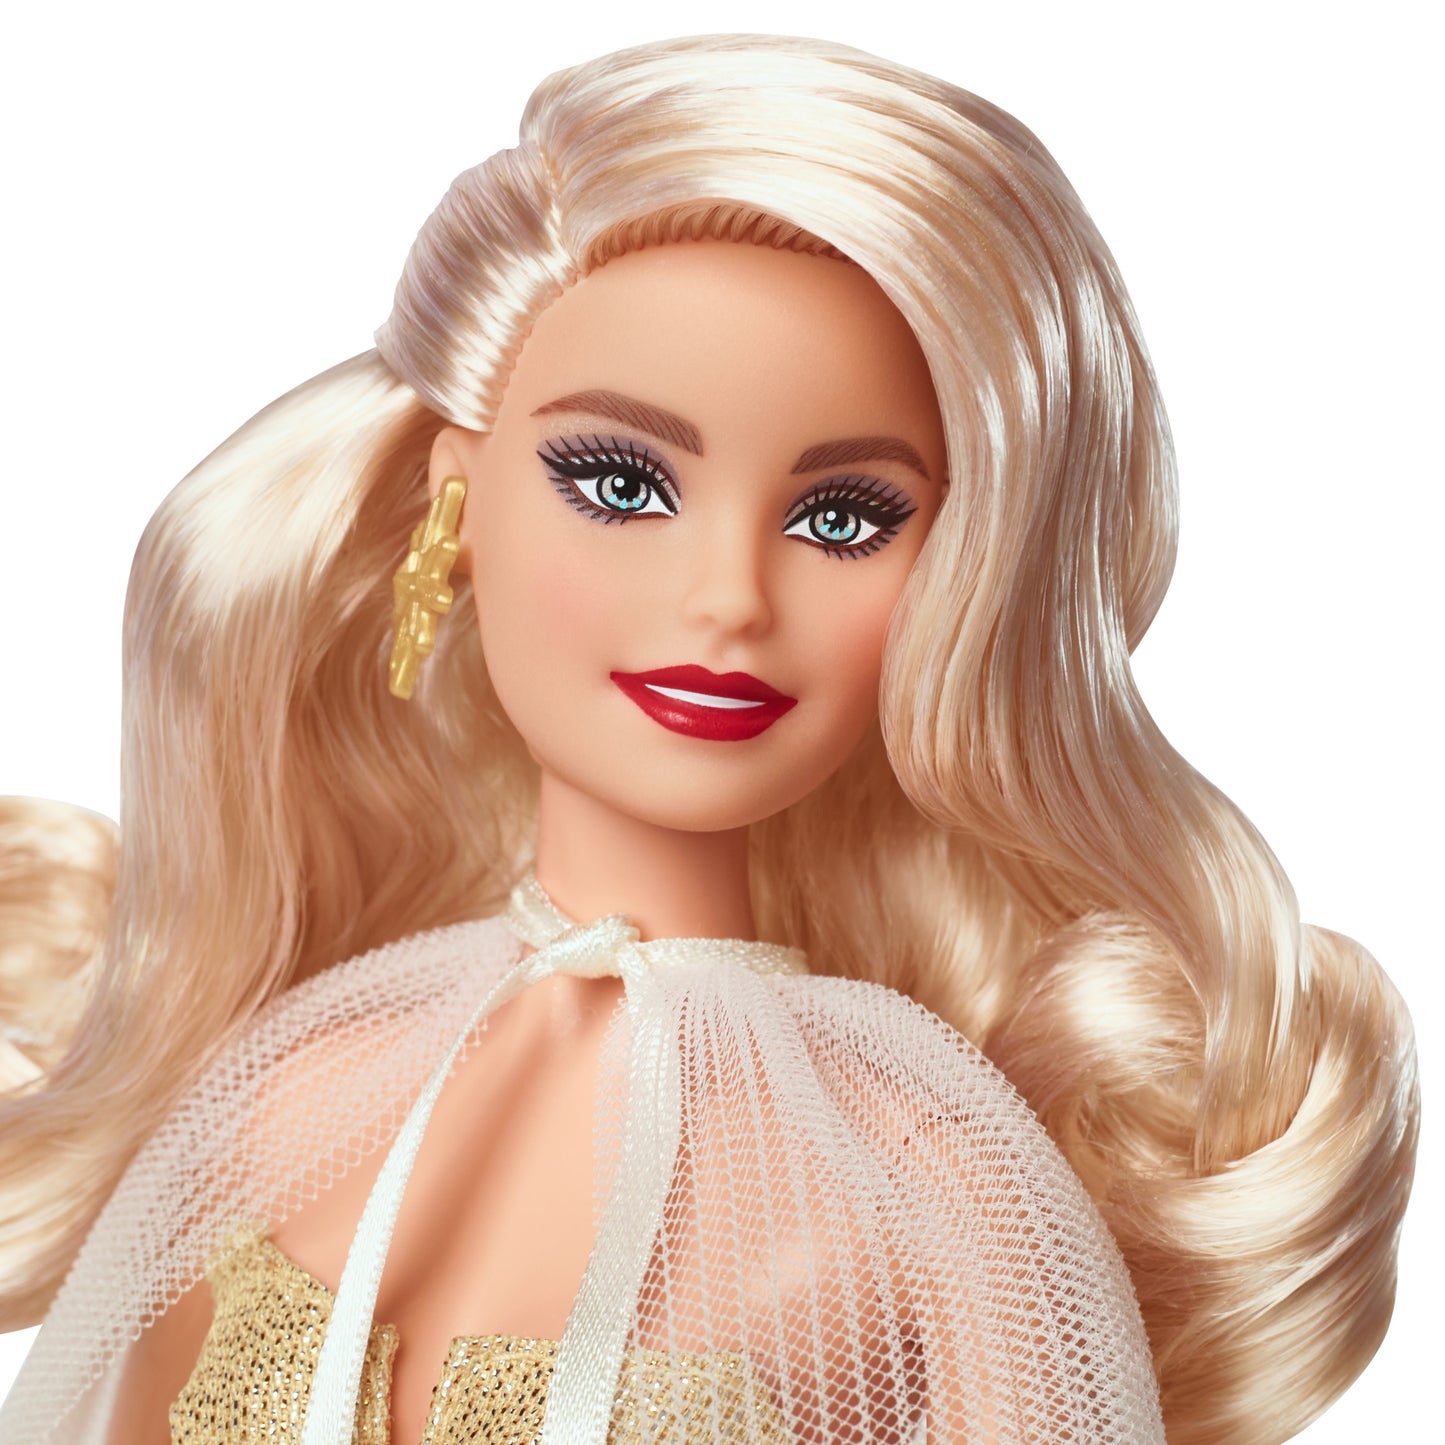 2023 Holiday BARBIE Doll, Blond Hair